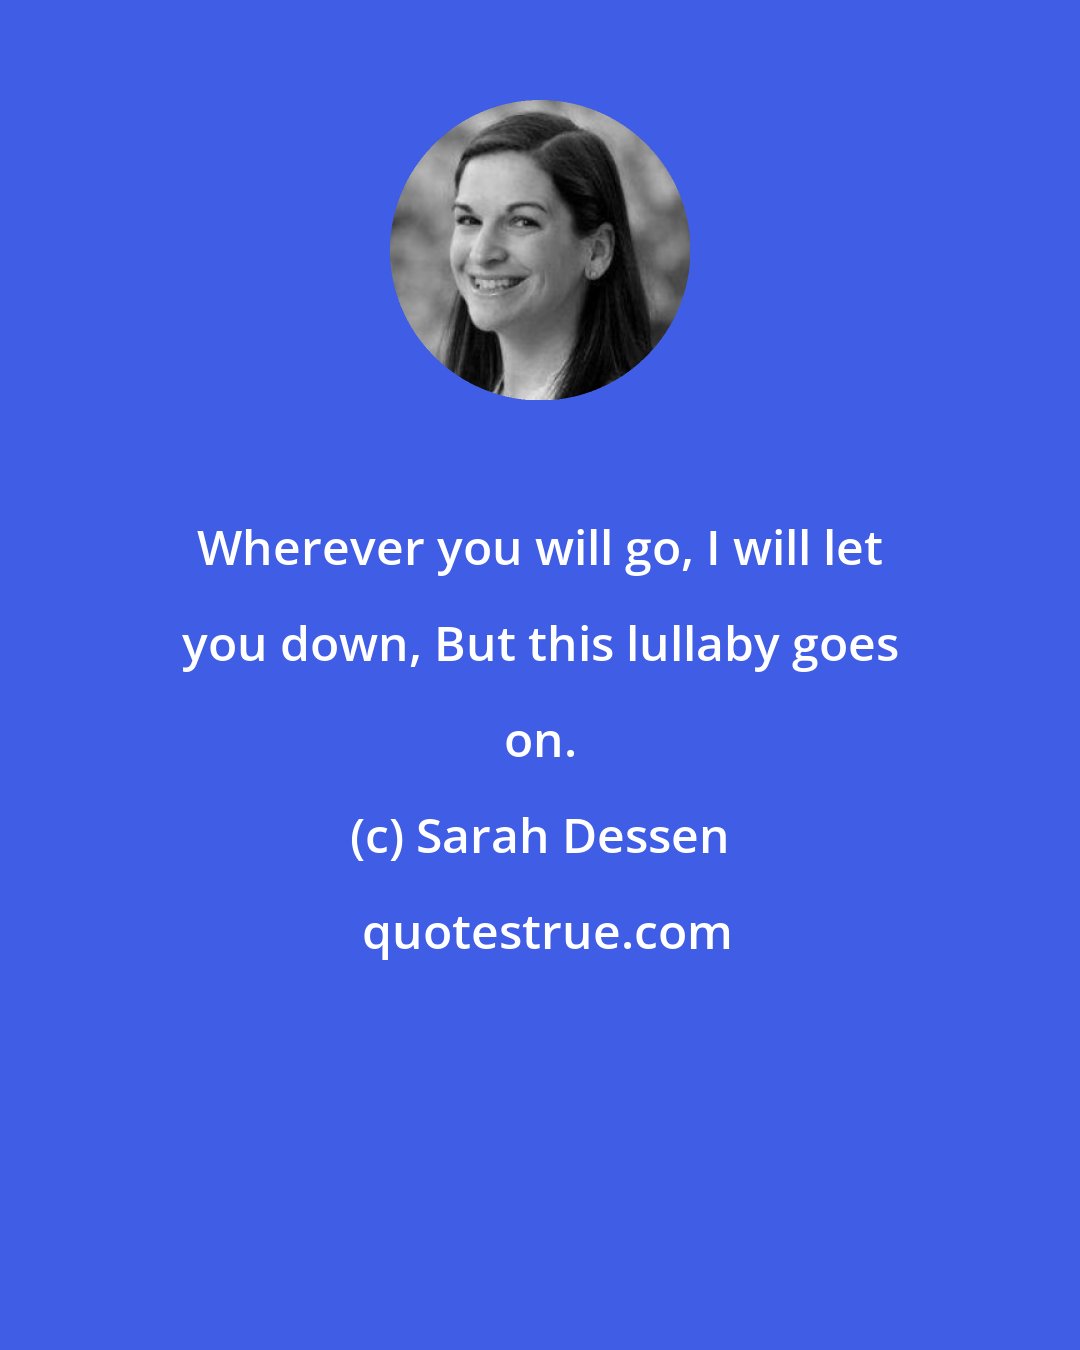 Sarah Dessen: Wherever you will go, I will let you down, But this lullaby goes on.